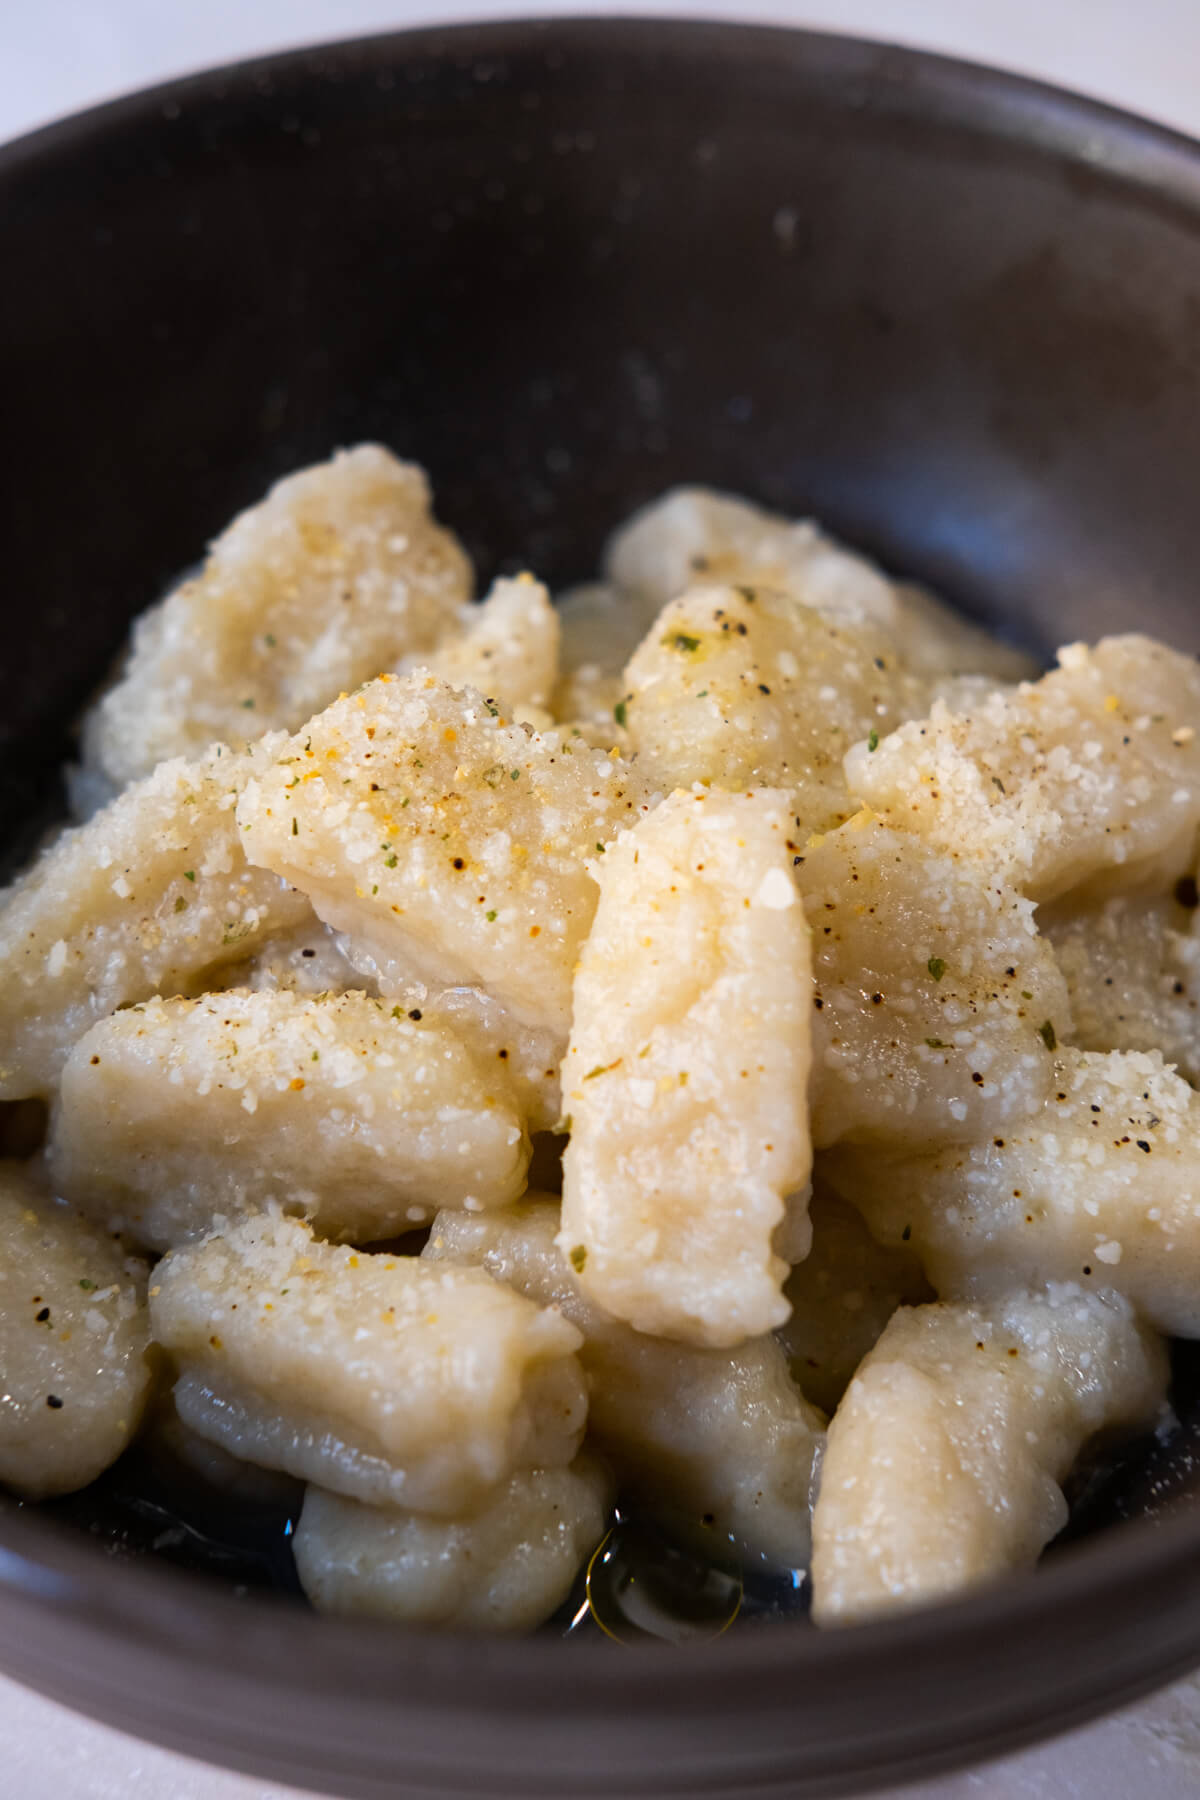 Gnocchi in a bowl, ready to serve.